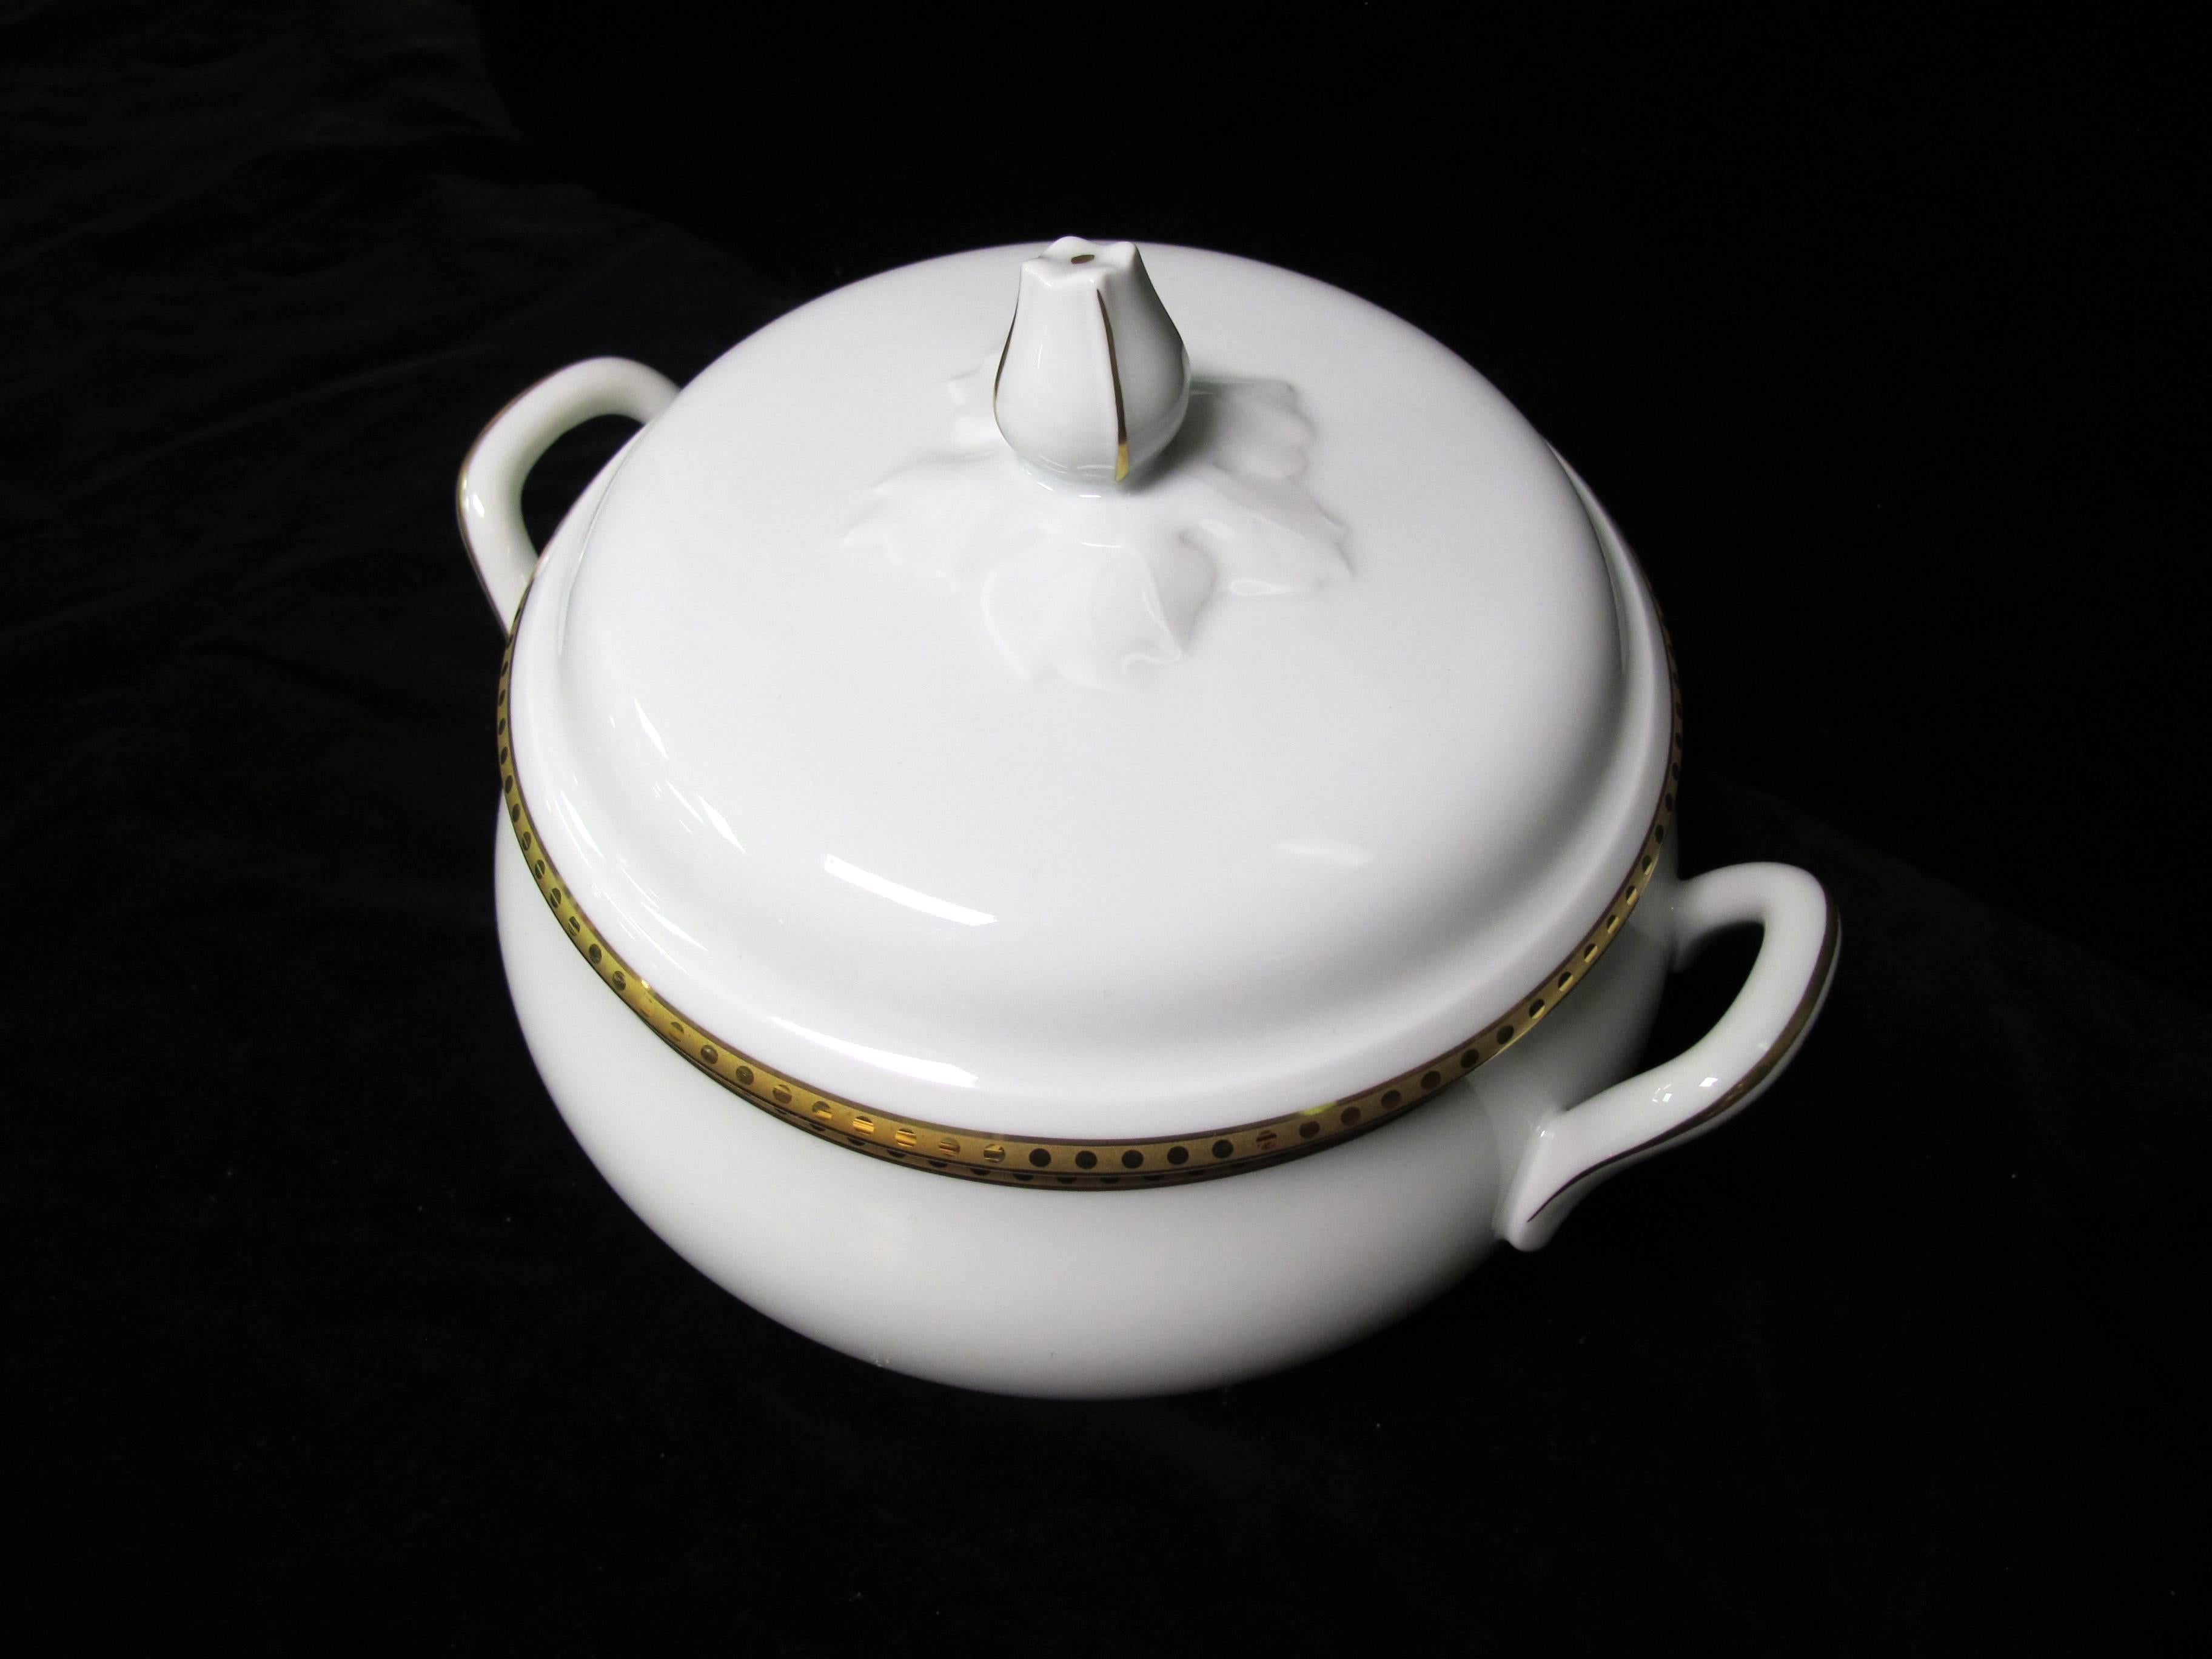 Tiffany & Co. soup tureen and lid. Measures: 10.5